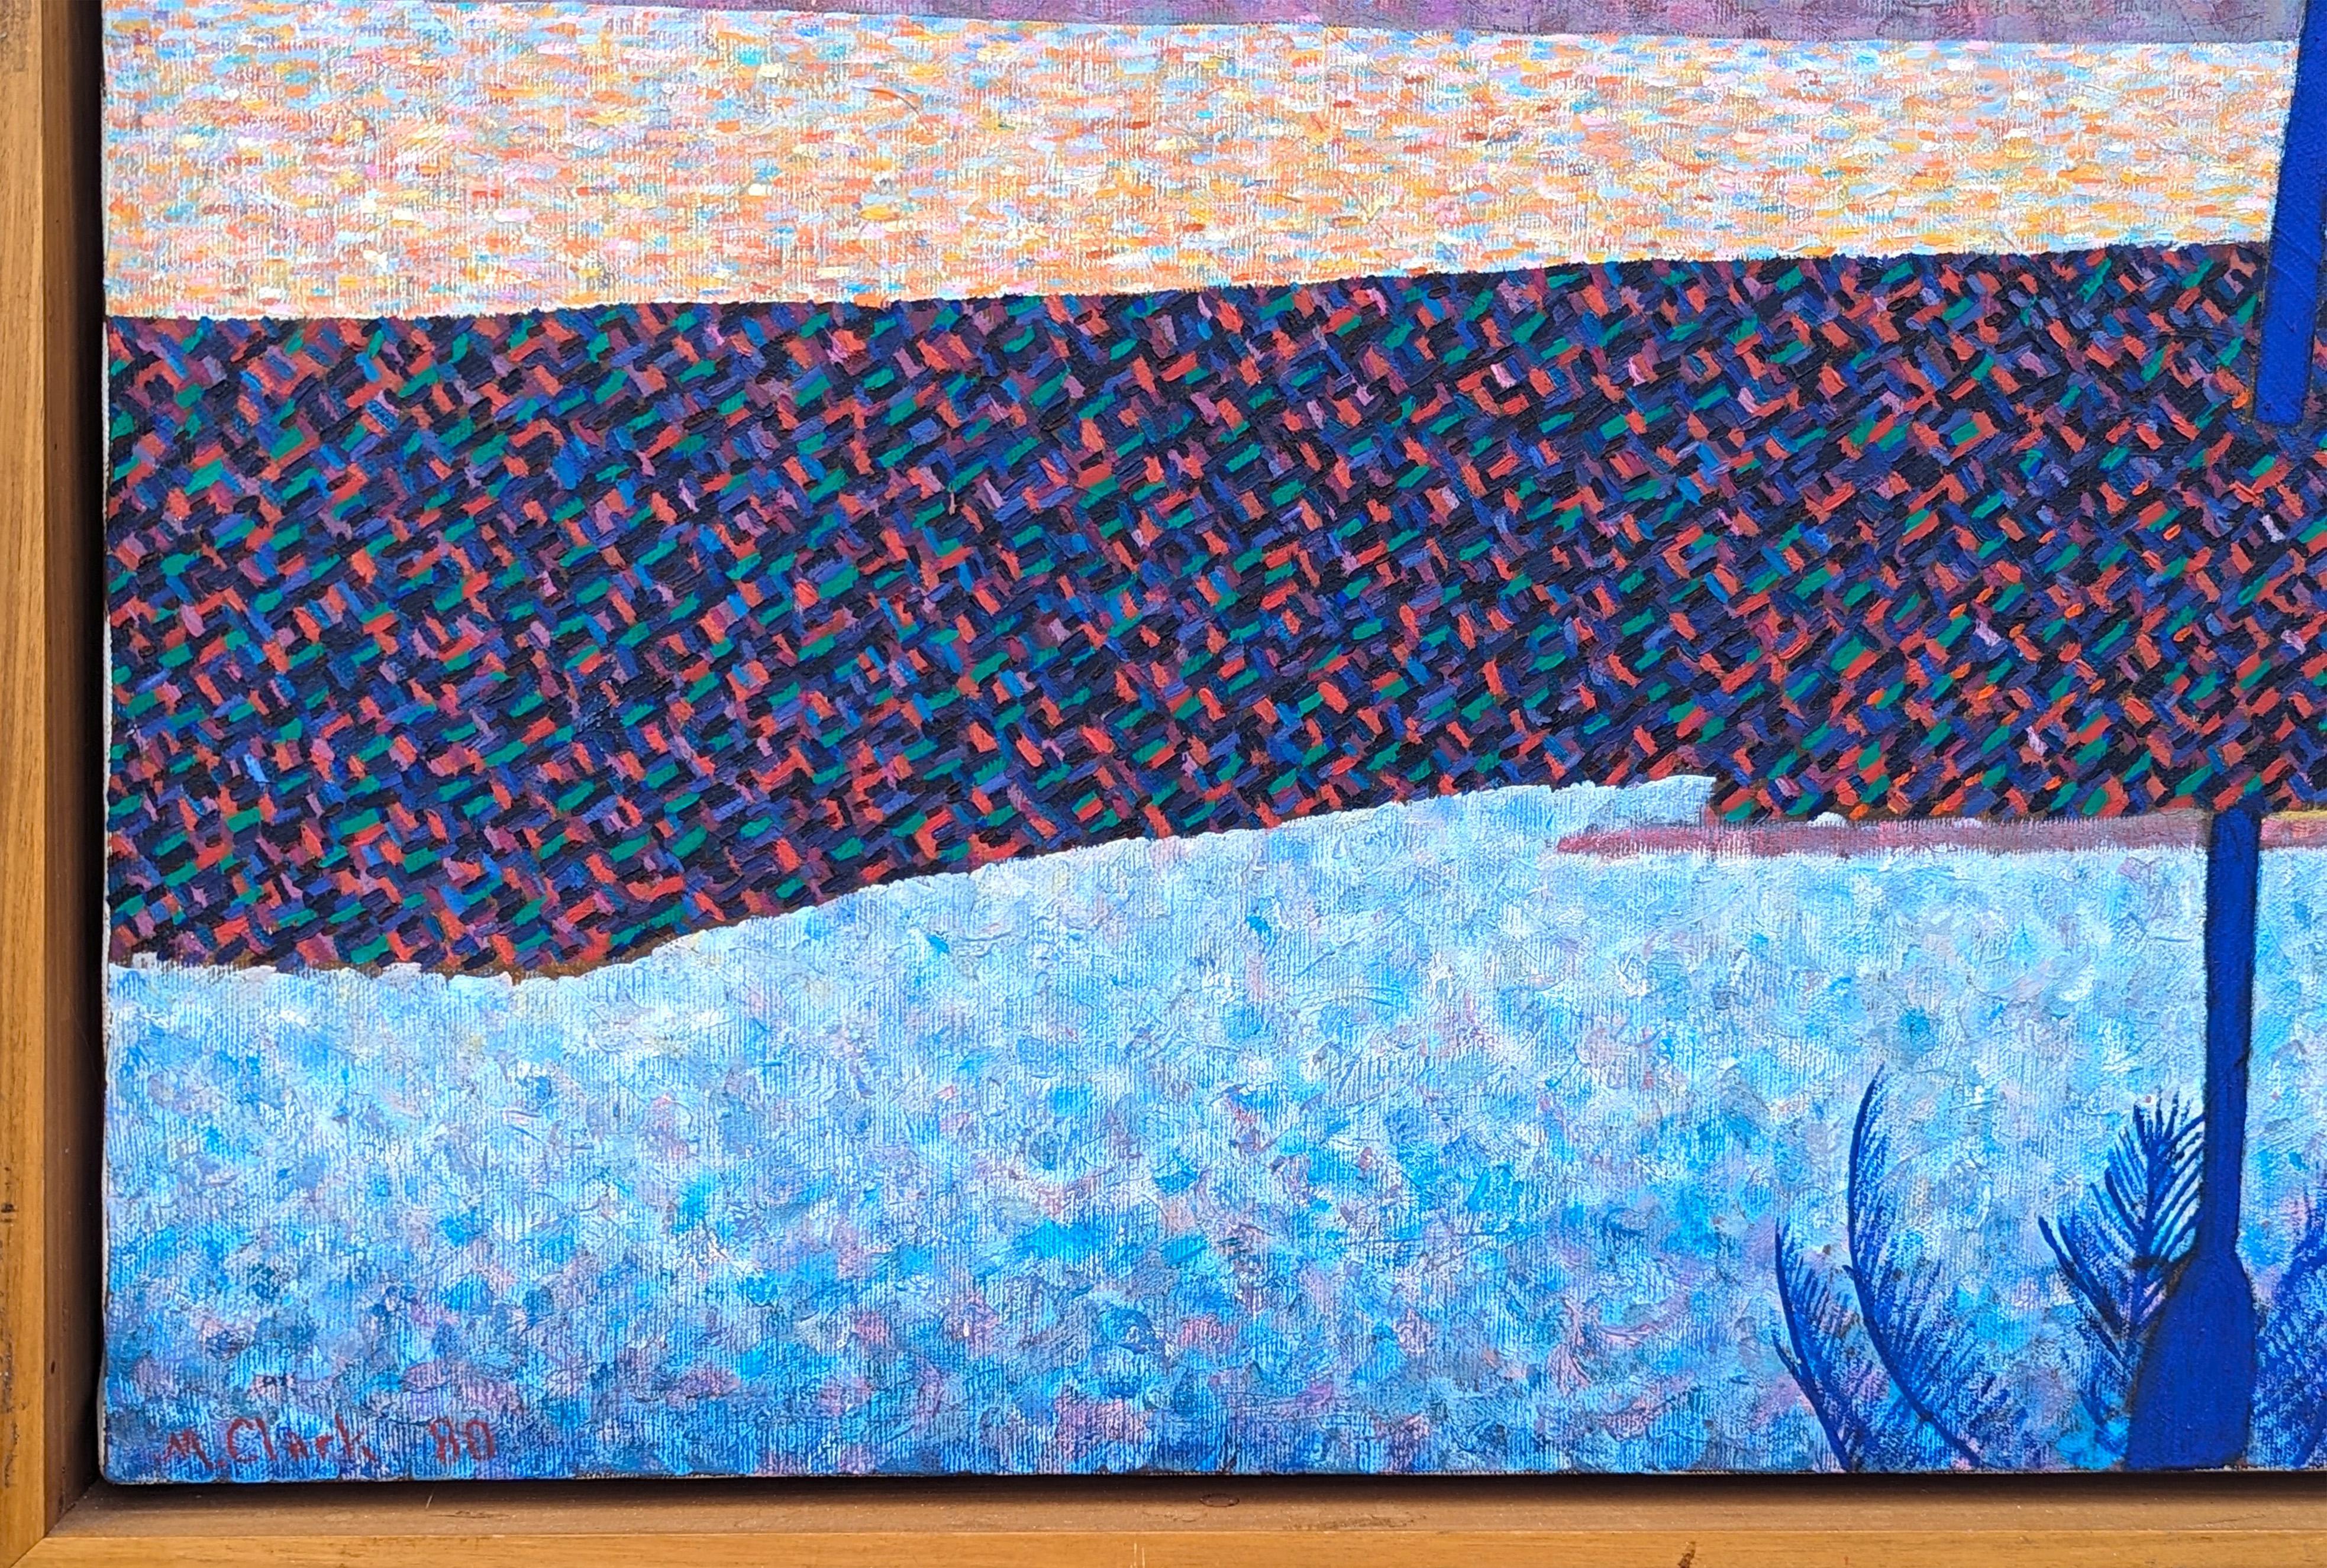 Modern blue toned tropical landscape painting by Texas born artist Clark Fox. The work features an abstract depiction of a sunset behind palm trees using pointillism, the practice of applying small strokes or dots of color to a surface so that from